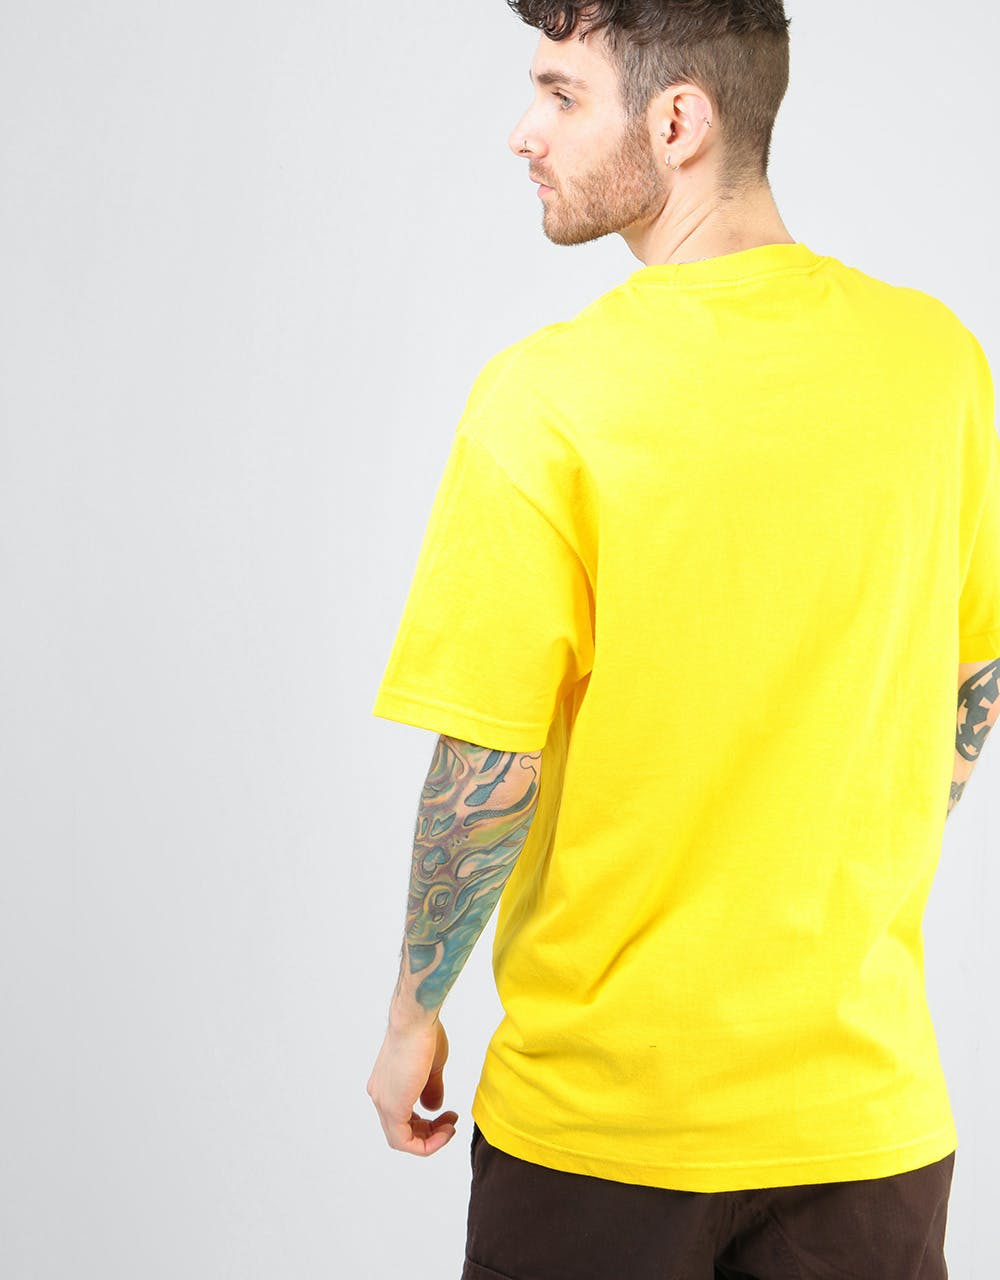 Almost Apex T-Shirt - Yellow